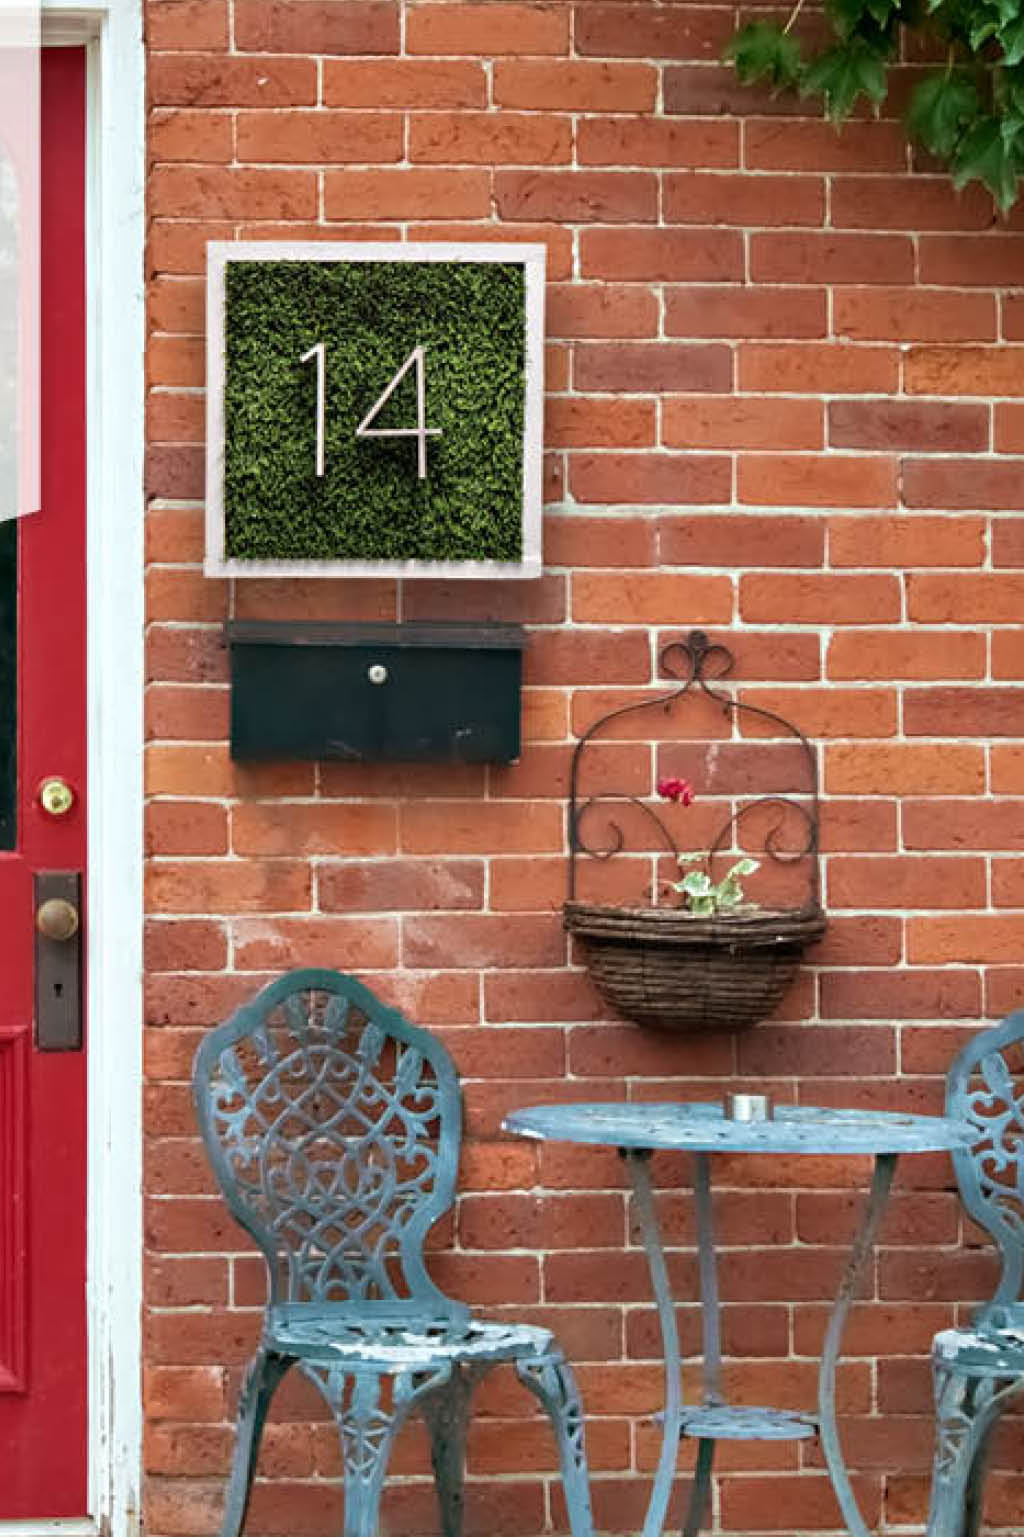 Front porch with red door and grassy house number